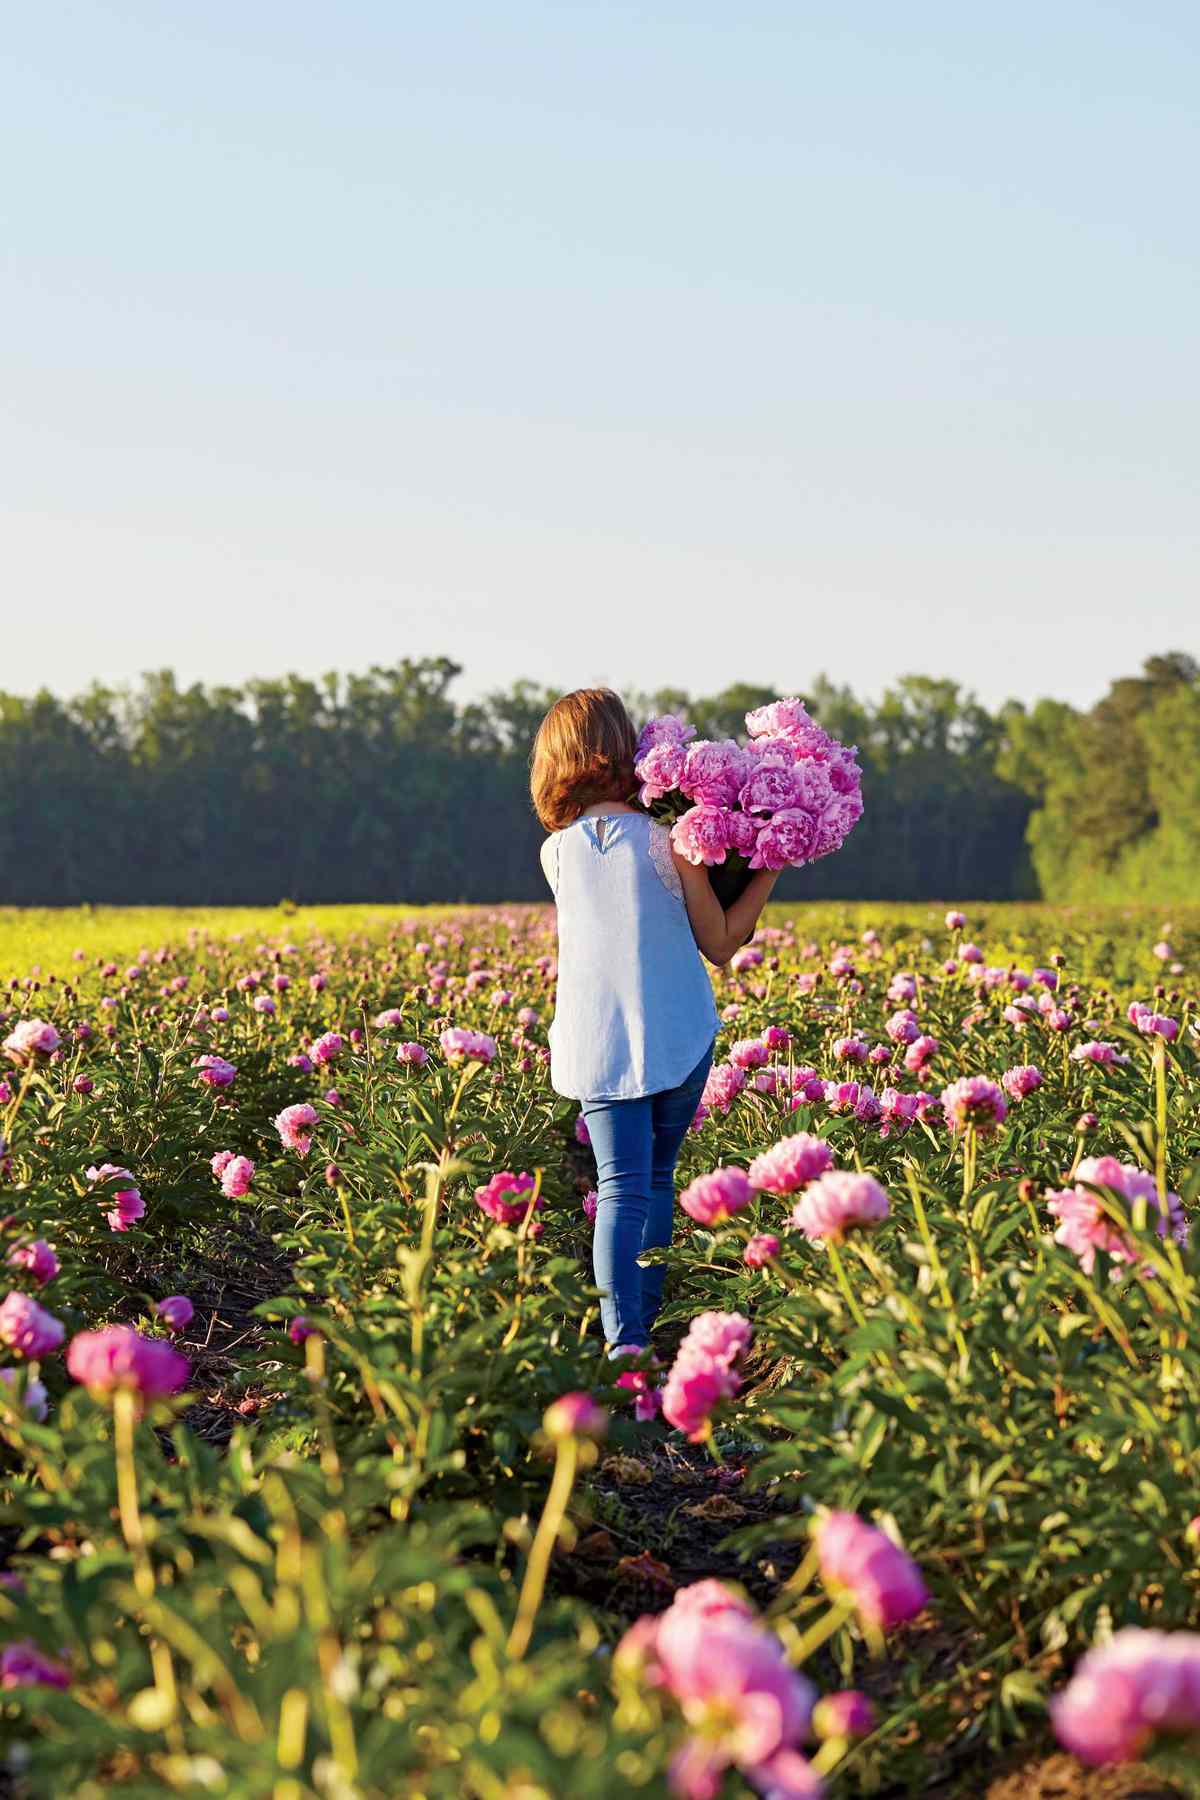 Peonies in a Field with Girl Walking